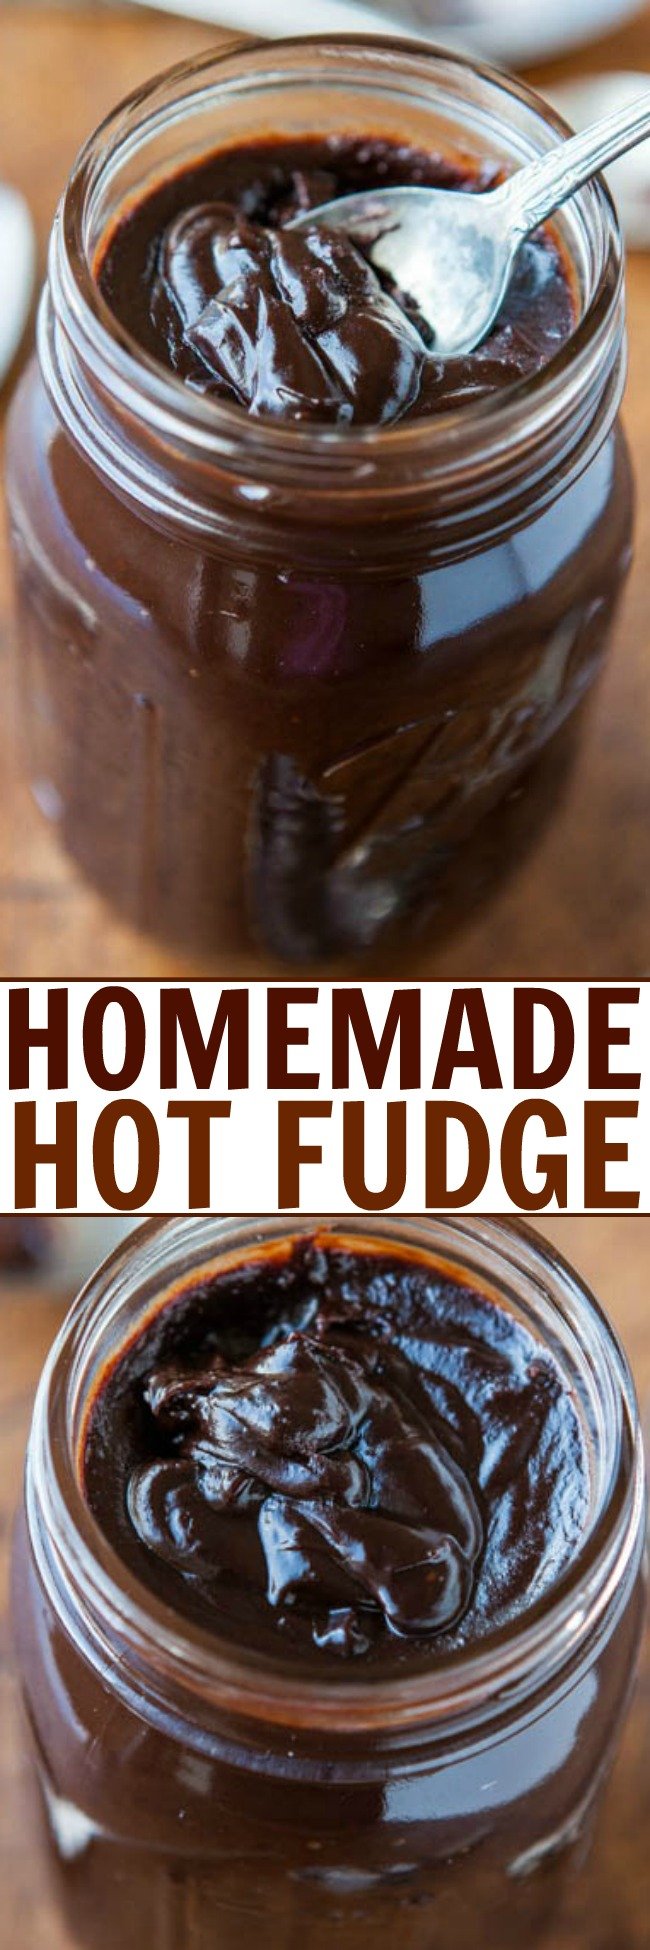 You’ll never want store-bought again after making your own Homemade Hot Fudge in under 10 minutes. It’s so easy that it’s dangerous! The hot fudge sauce is thick, rich, dense, fudgy, very intensely chocolaty and not overly sweet. Serve over ice cream, brownies, cakes, cookies, waffles, pancakes, or just find a spoon and dig in!